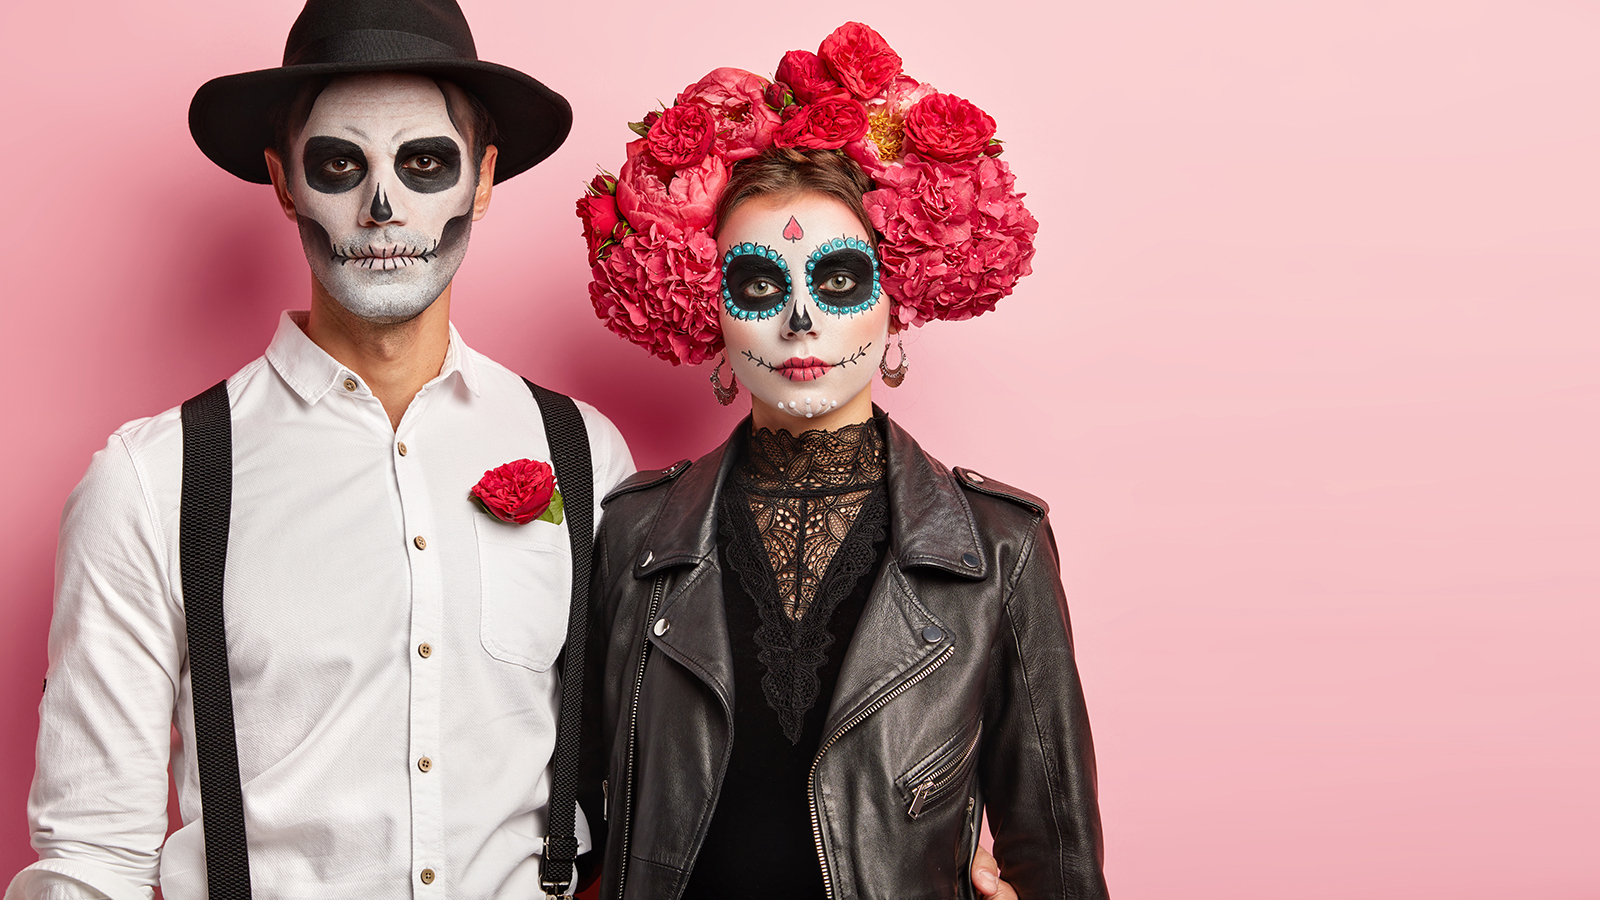 Bridal couple celebrate typical Mexican holiday, wear special costumes, have wedding on cemetery, pose indoor against pink background, blank space aside. Day of Dead carnival and celebration.